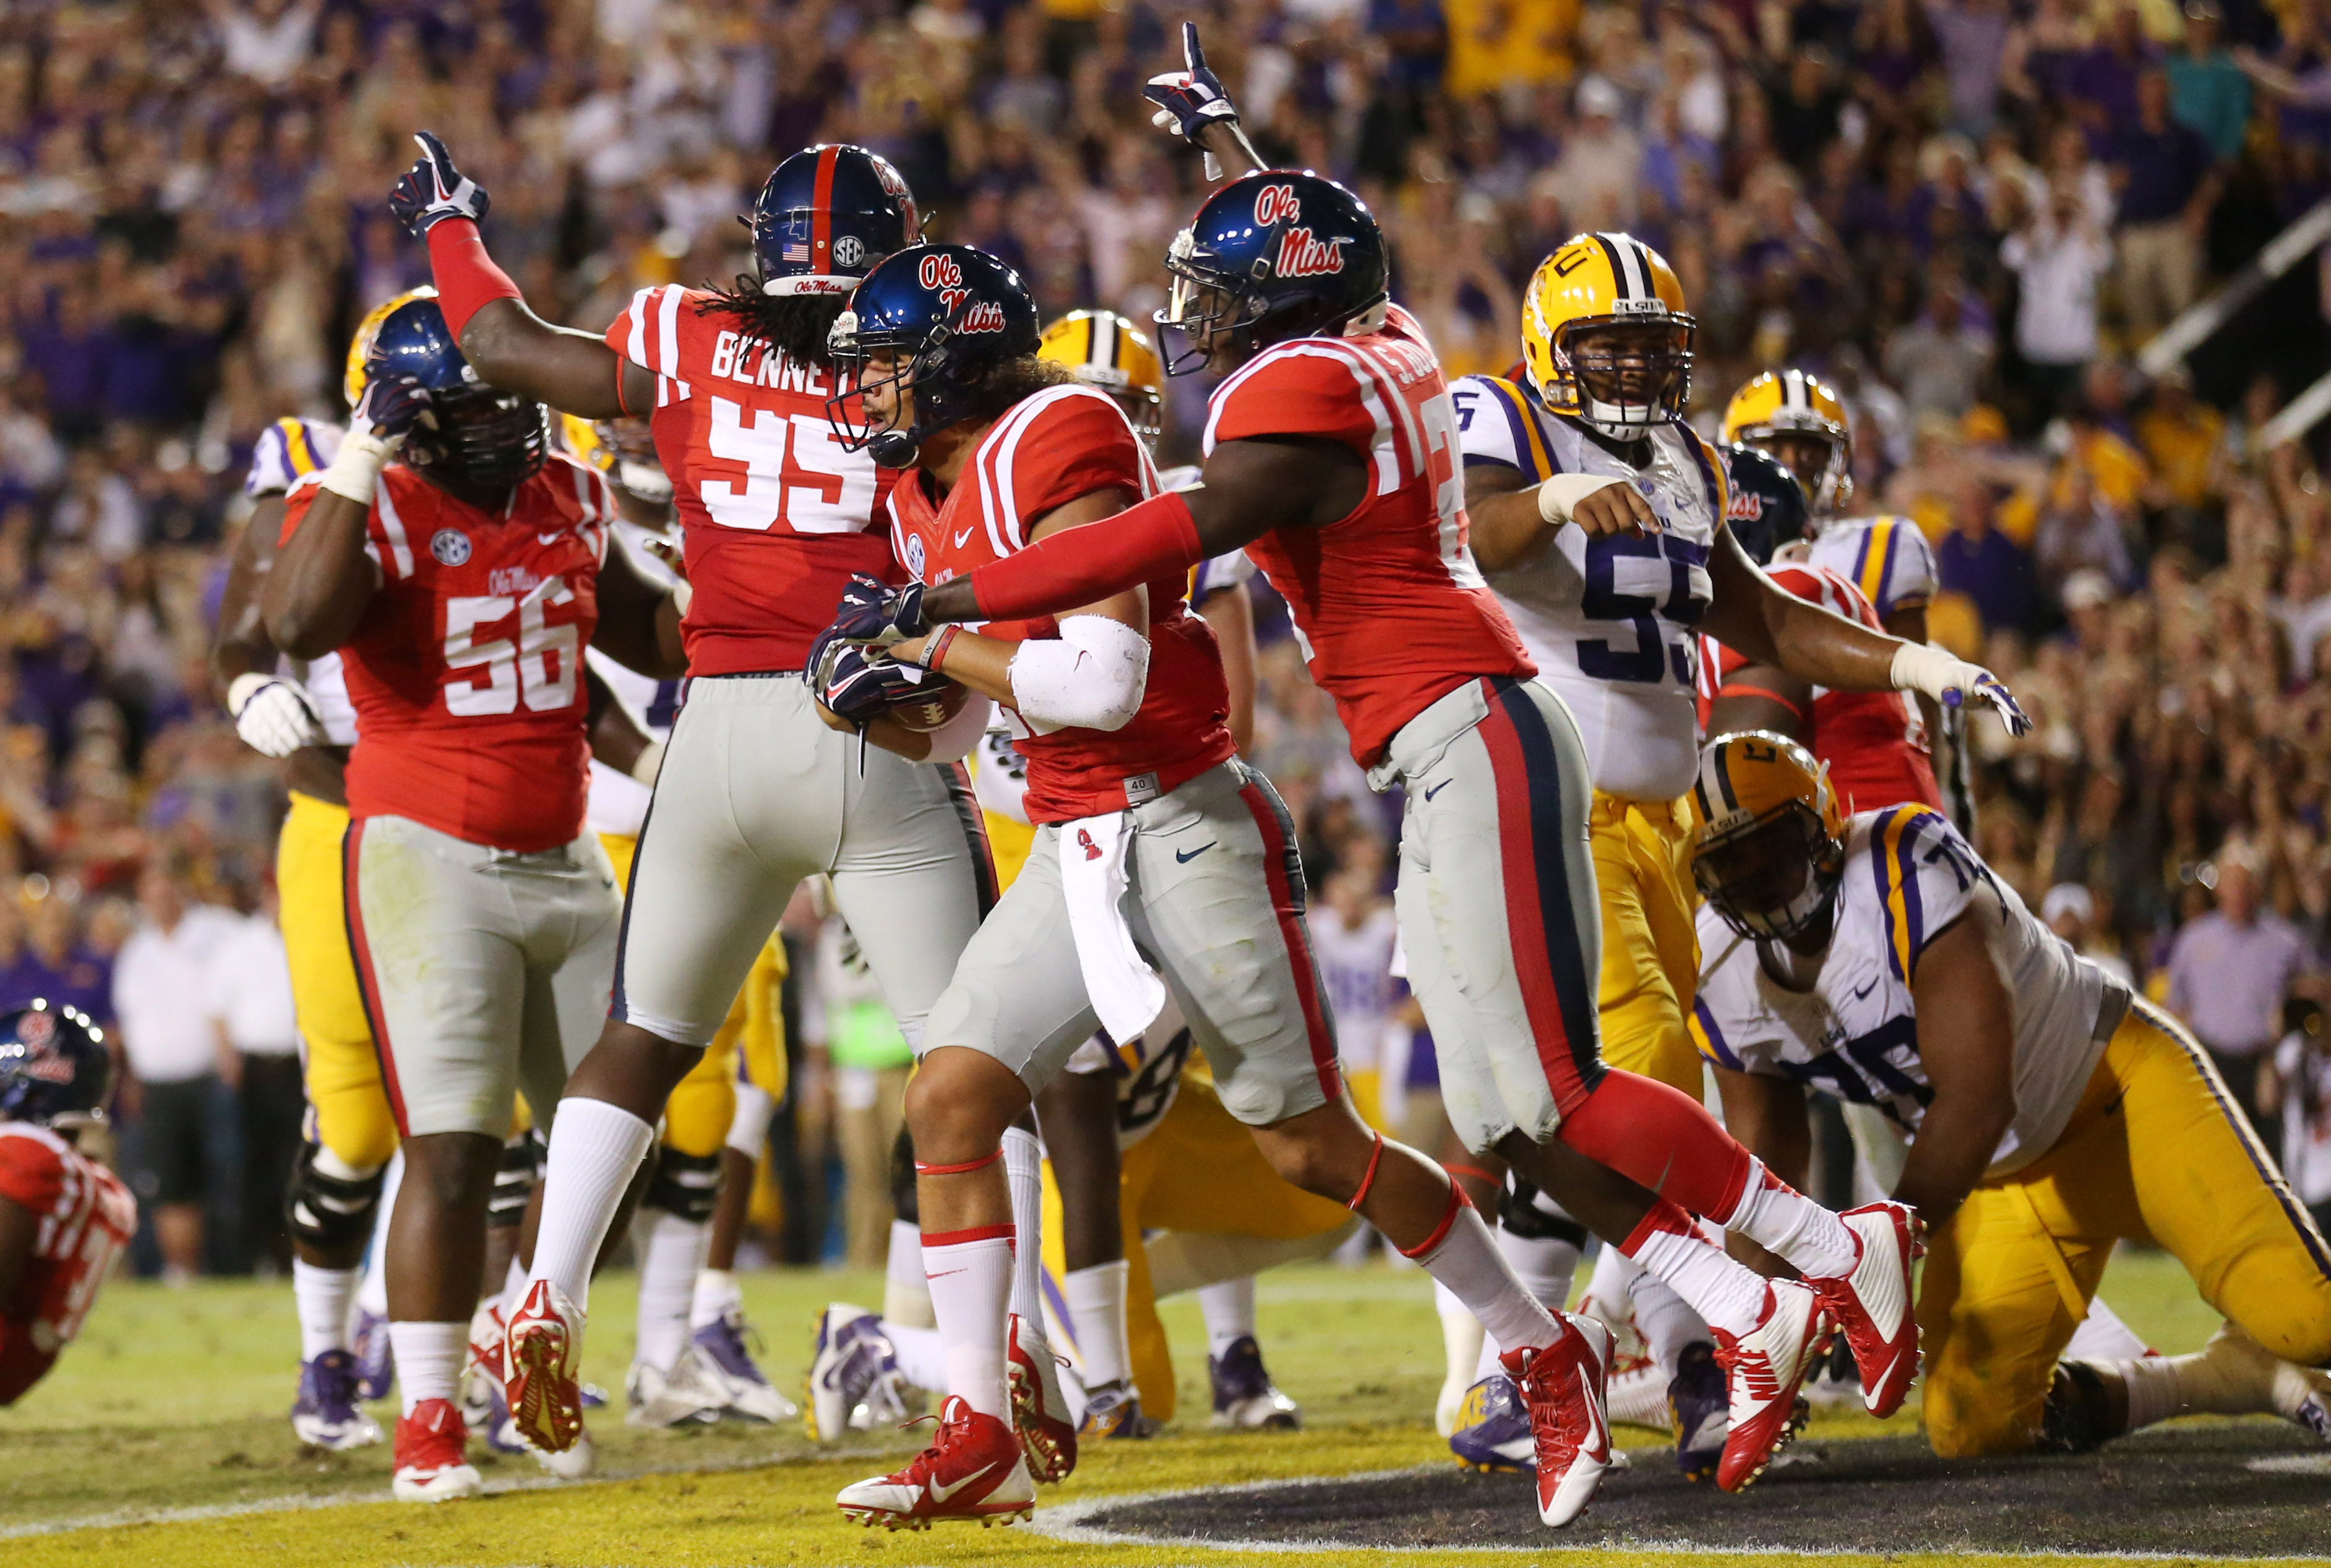 Oct 25, 2014; Baton Rouge, LA, USA; Mississippi Rebels defensive back Cody Prewitt (25) is congratulated by teammate Senquez Golson (21) after recovering a fumble by the LSU Tigers in the first quarter at Tiger Stadium. (Crystal LoGiudice-USA TODAY Sports)